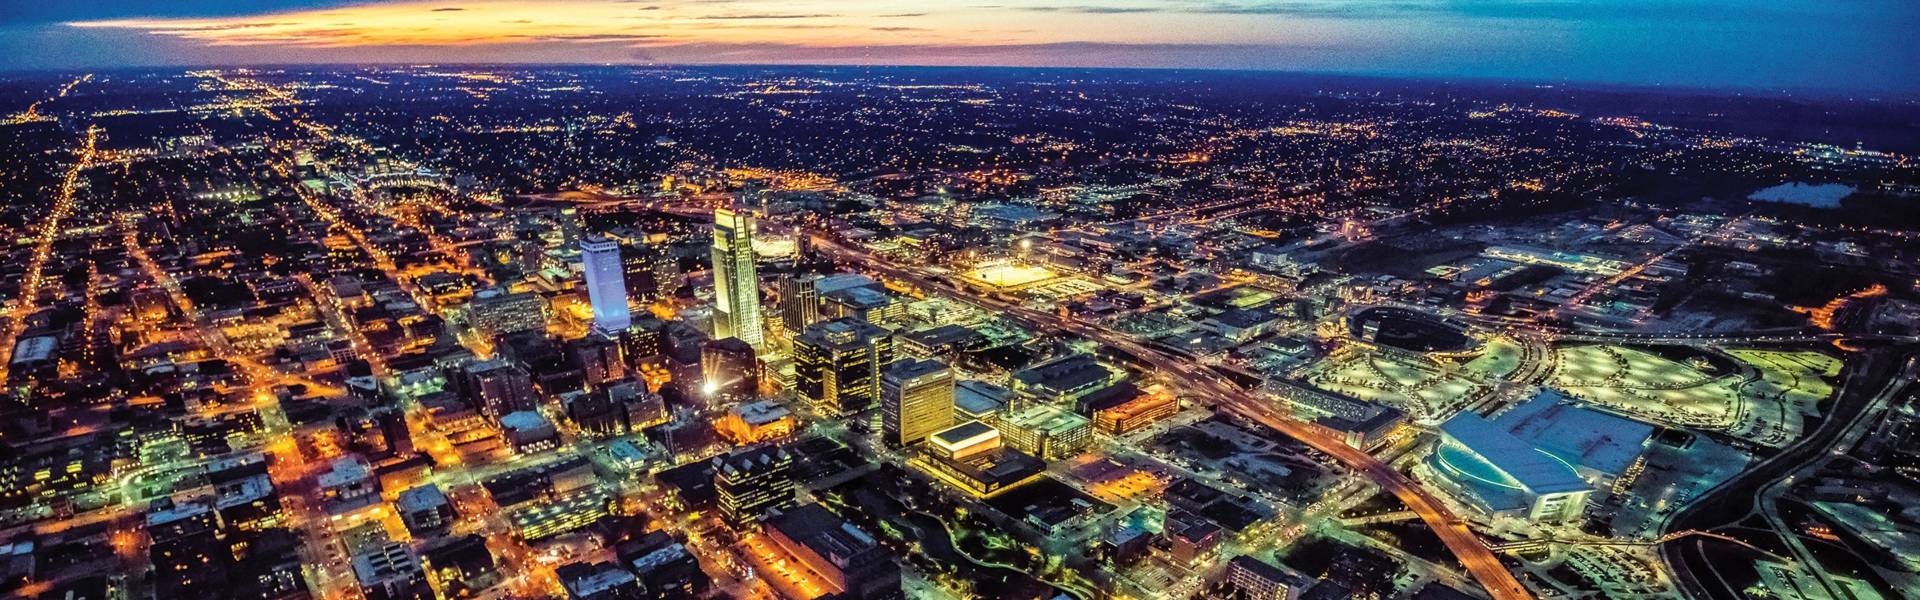 Aerial view of Omaha provided by Visit Omaha